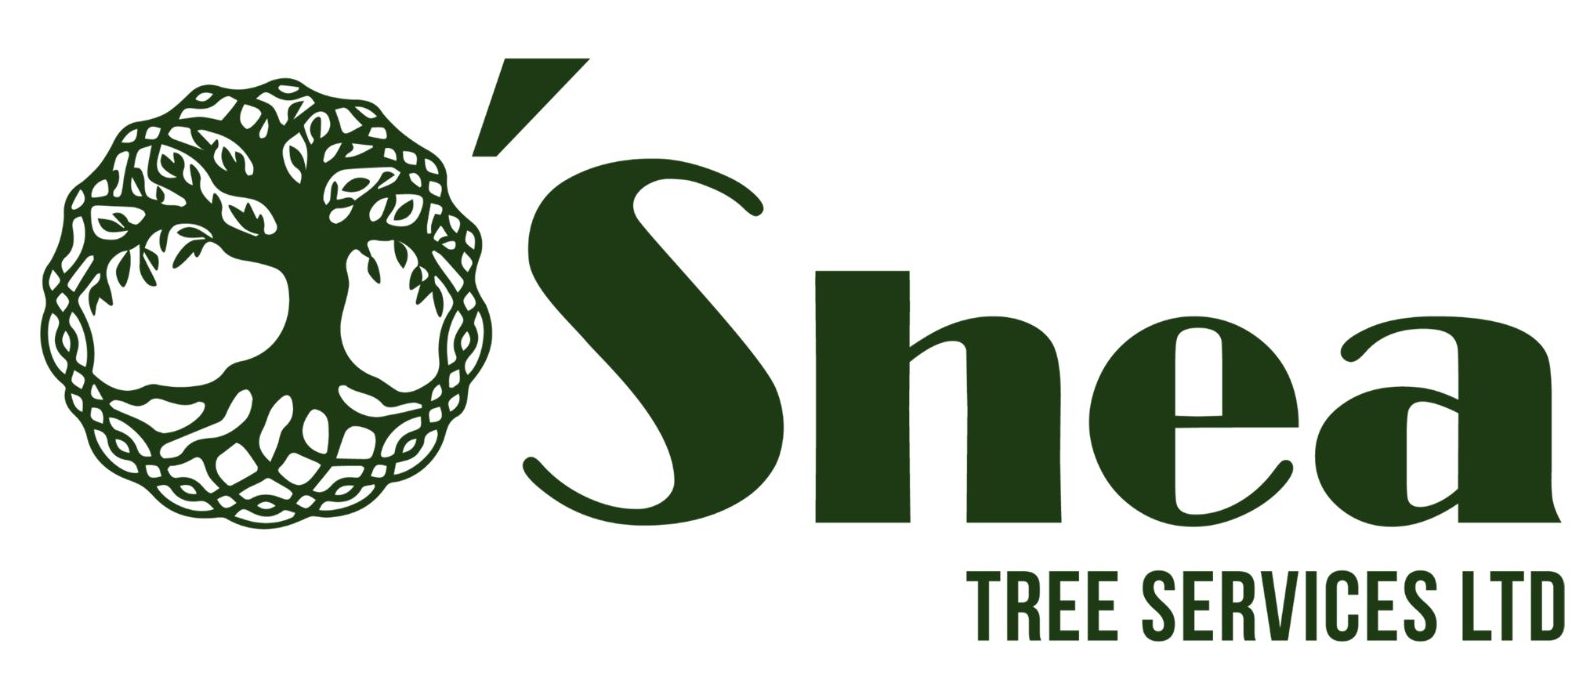 Bristol Marketing Company provided logo design, branding and graphic design for O'Shea Tree Services. Bristol Marketing Company also provided graphic design, website design, website development, professional photography and business card design.